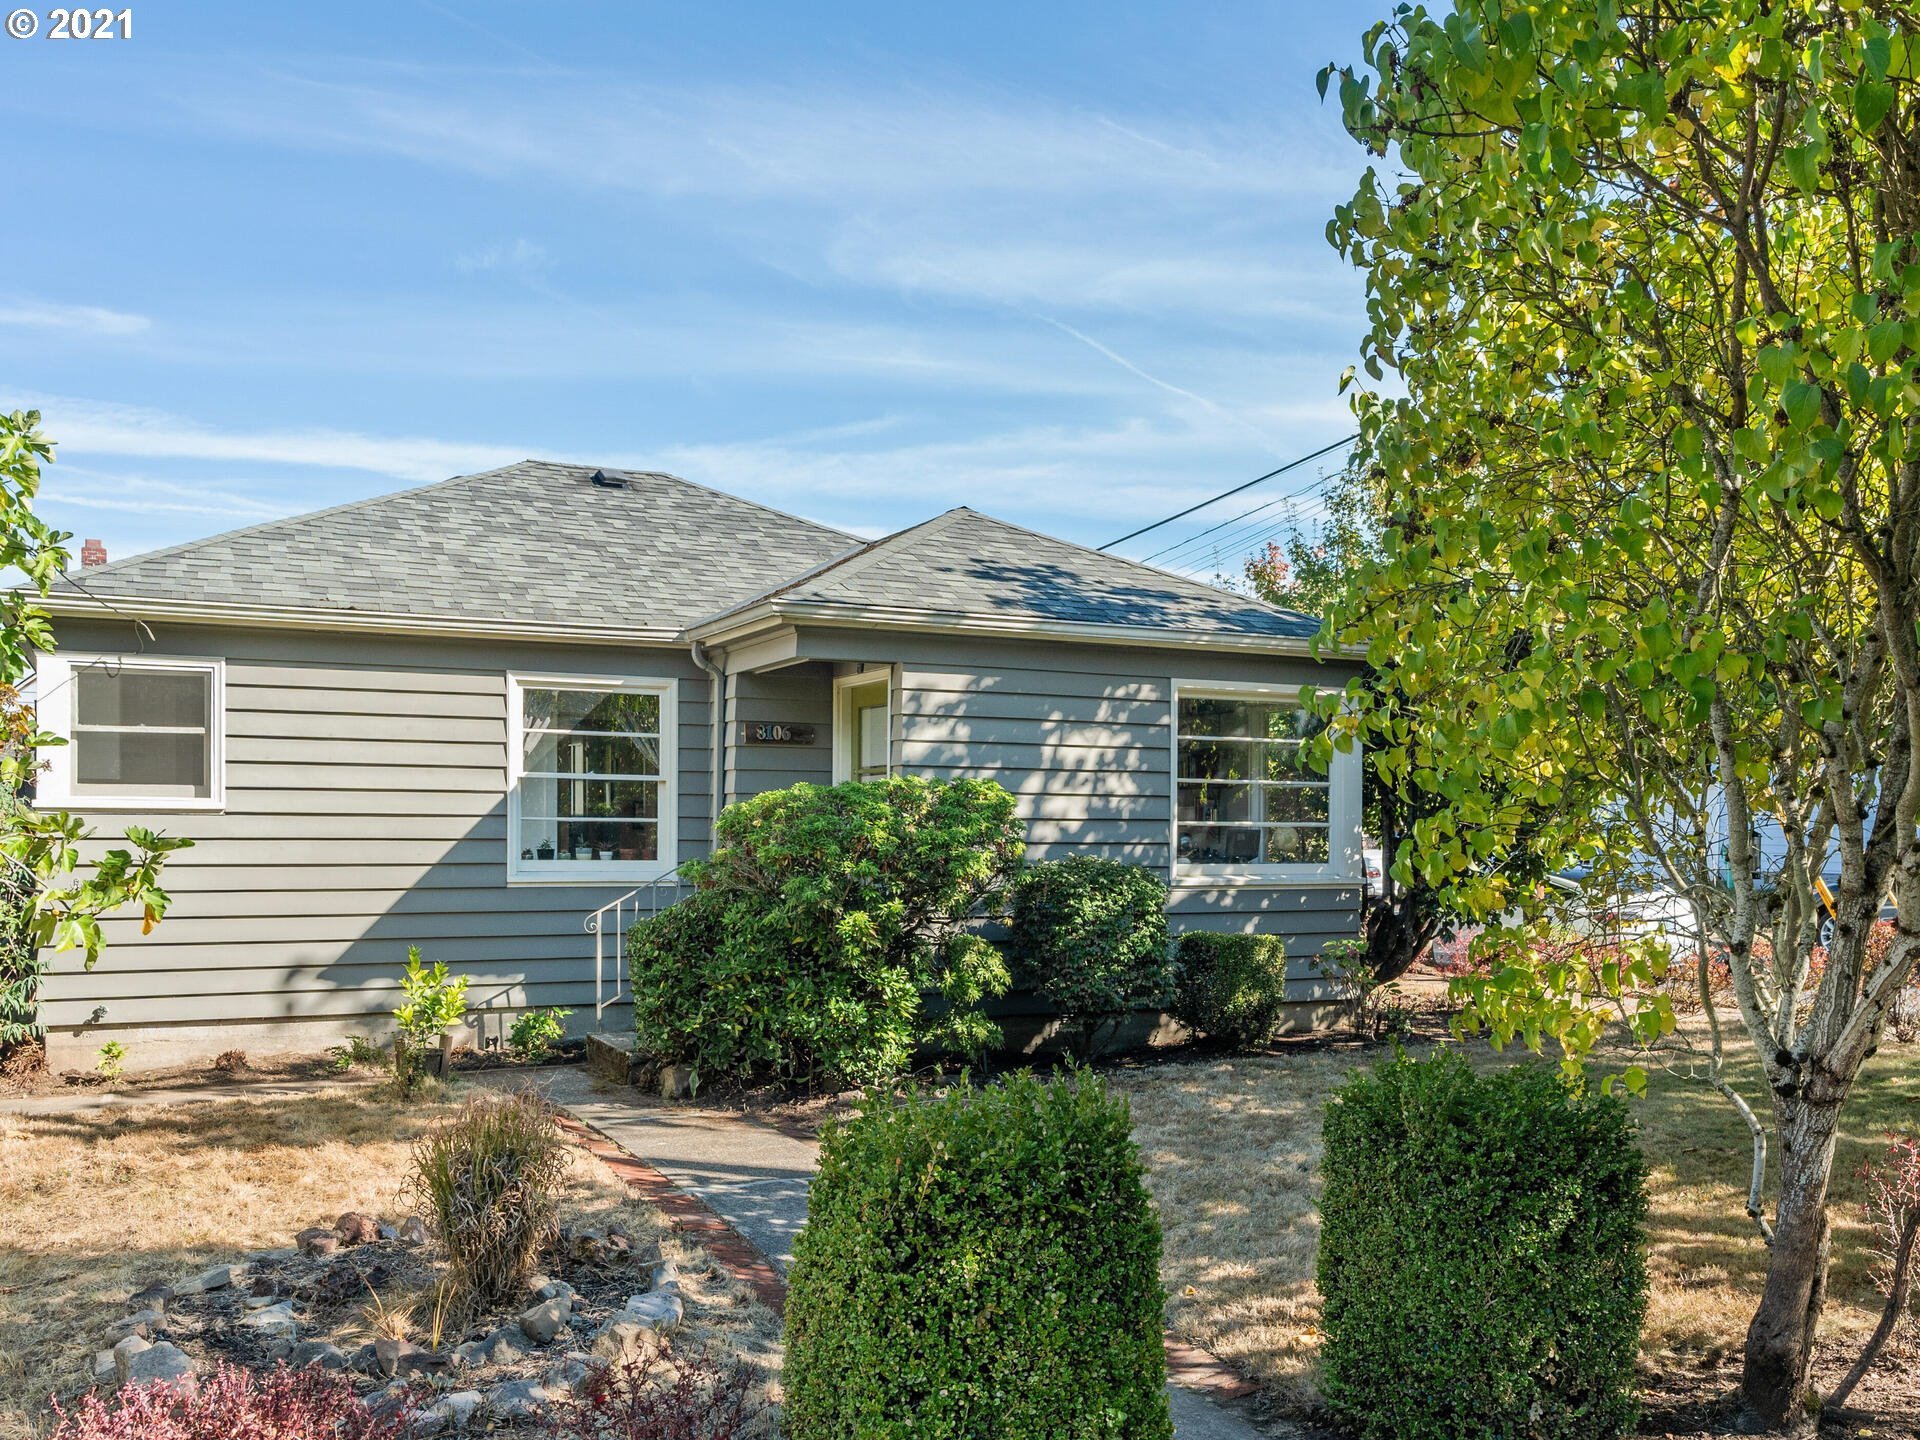 8106 N EMERALD AVE (1 of 32)